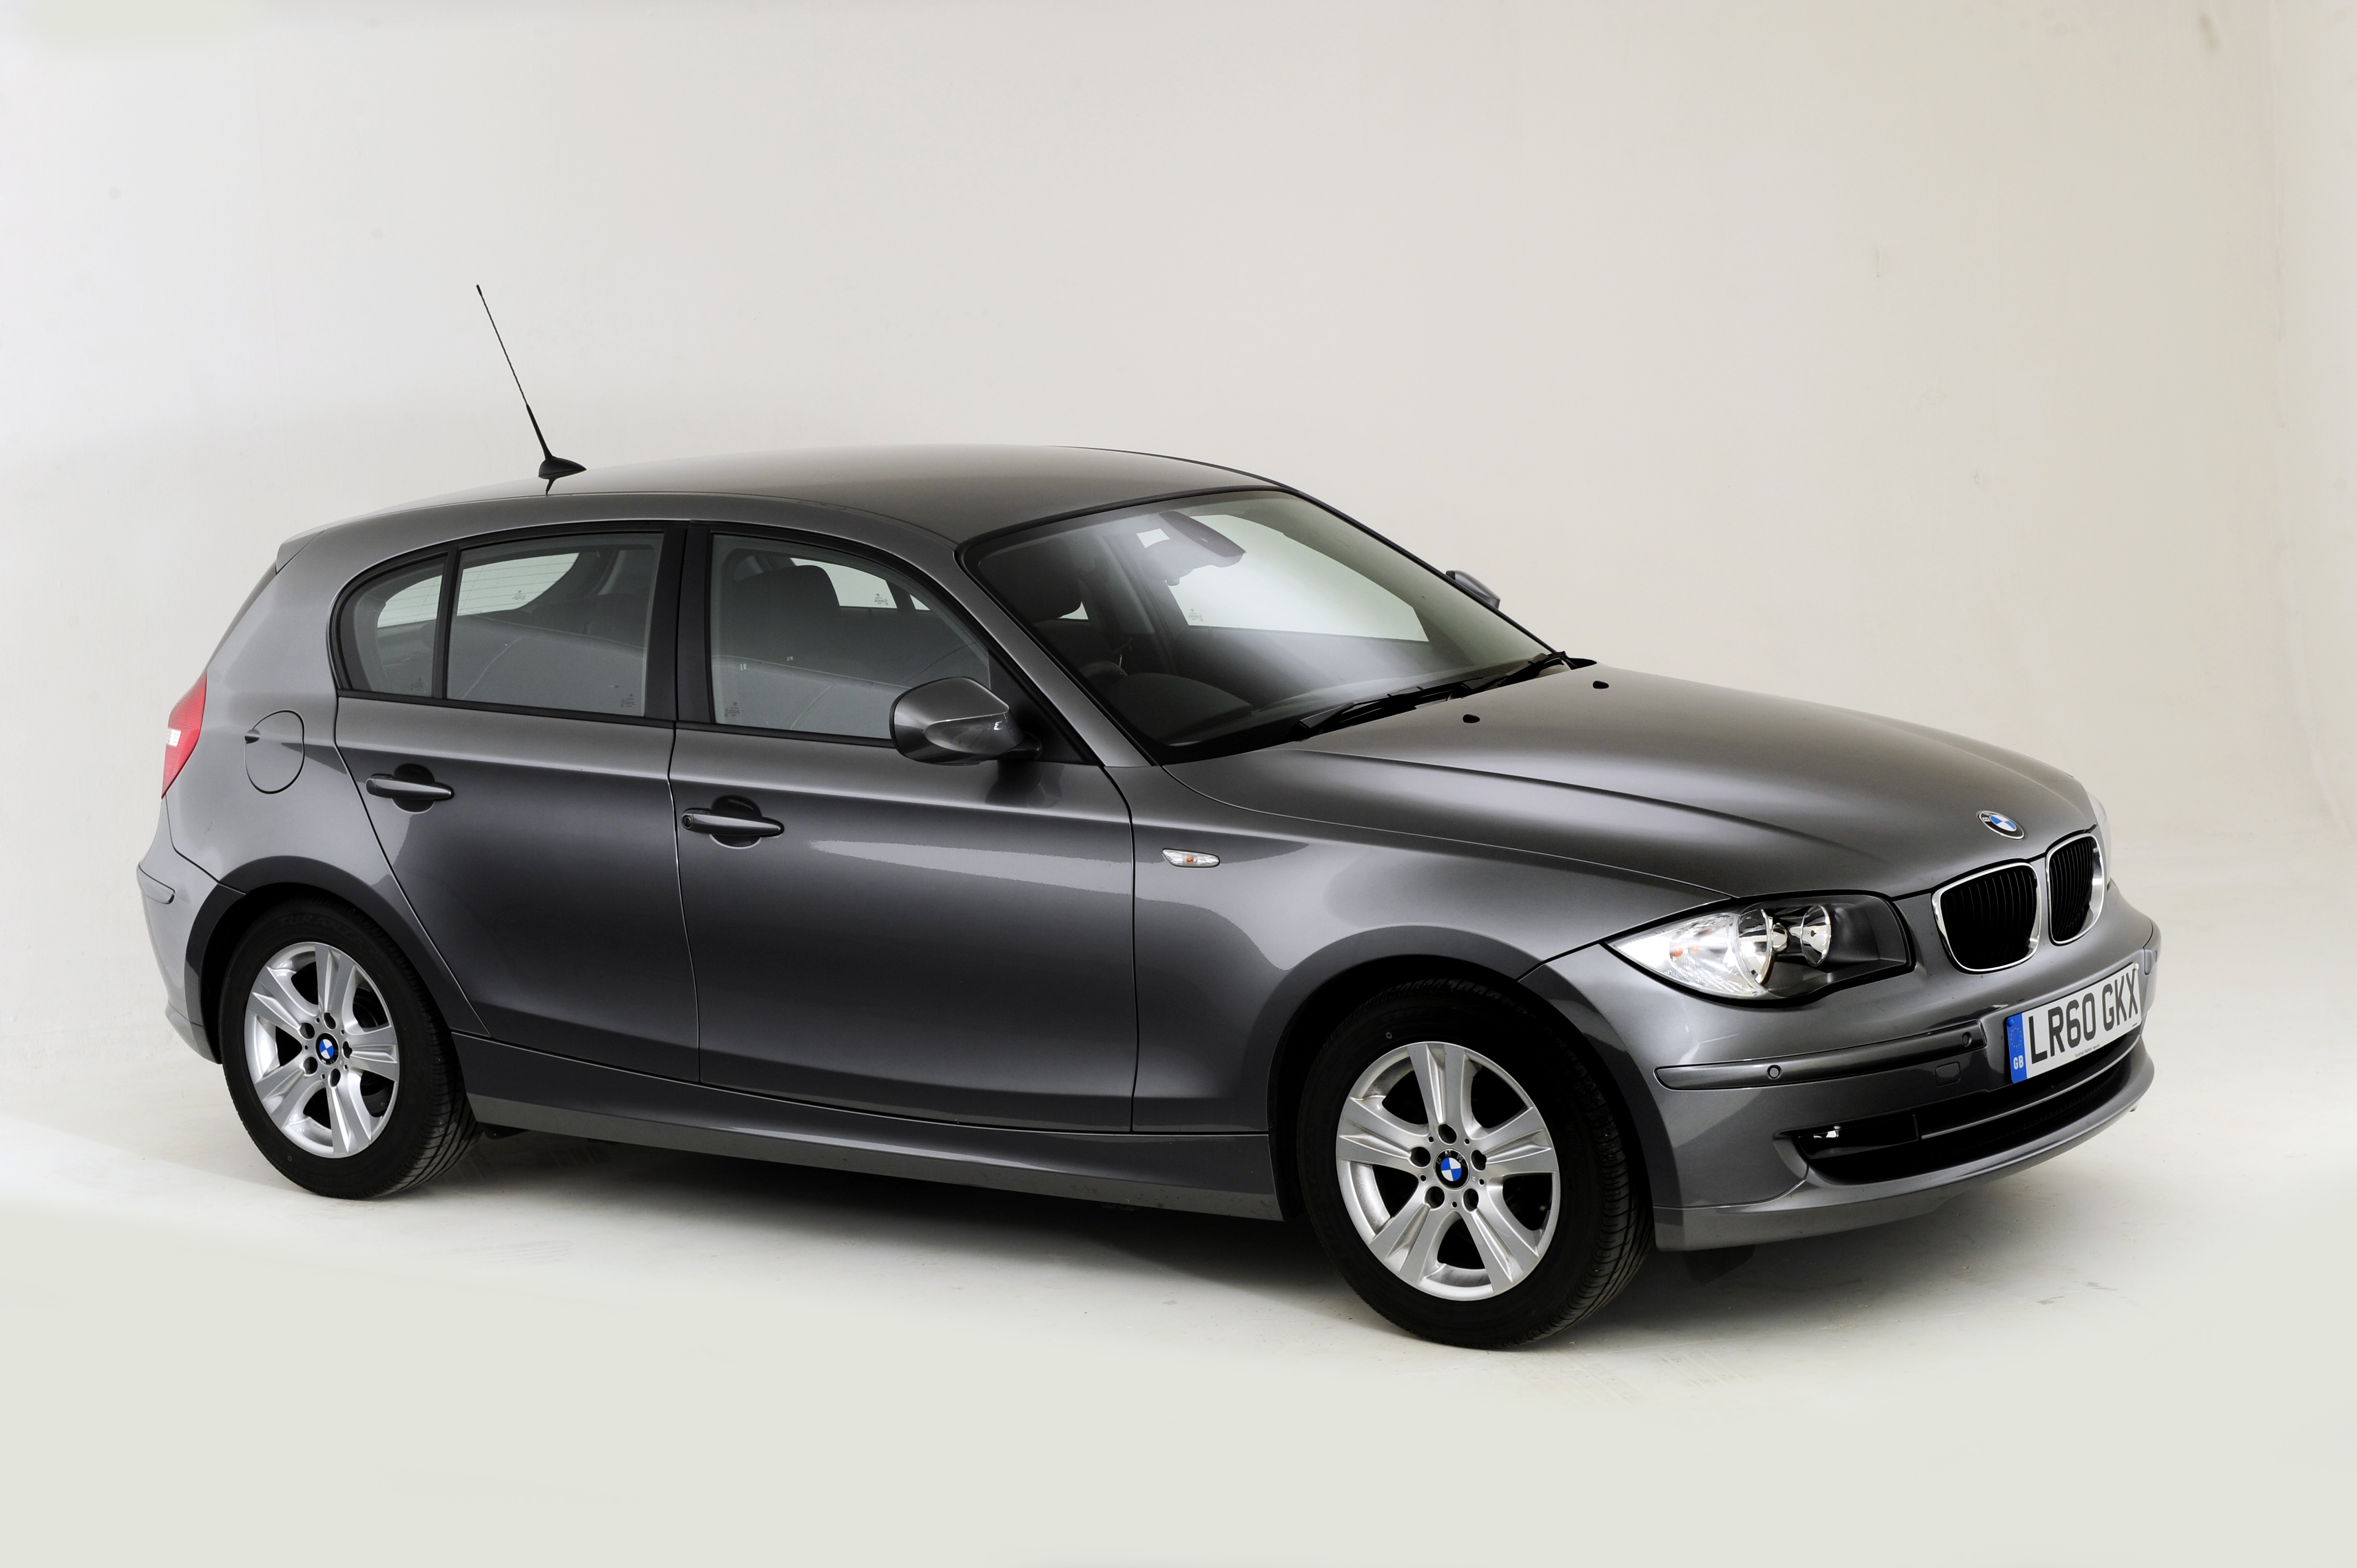 BMW 1 Series - Compact Sporty Hatchback Cars & Models